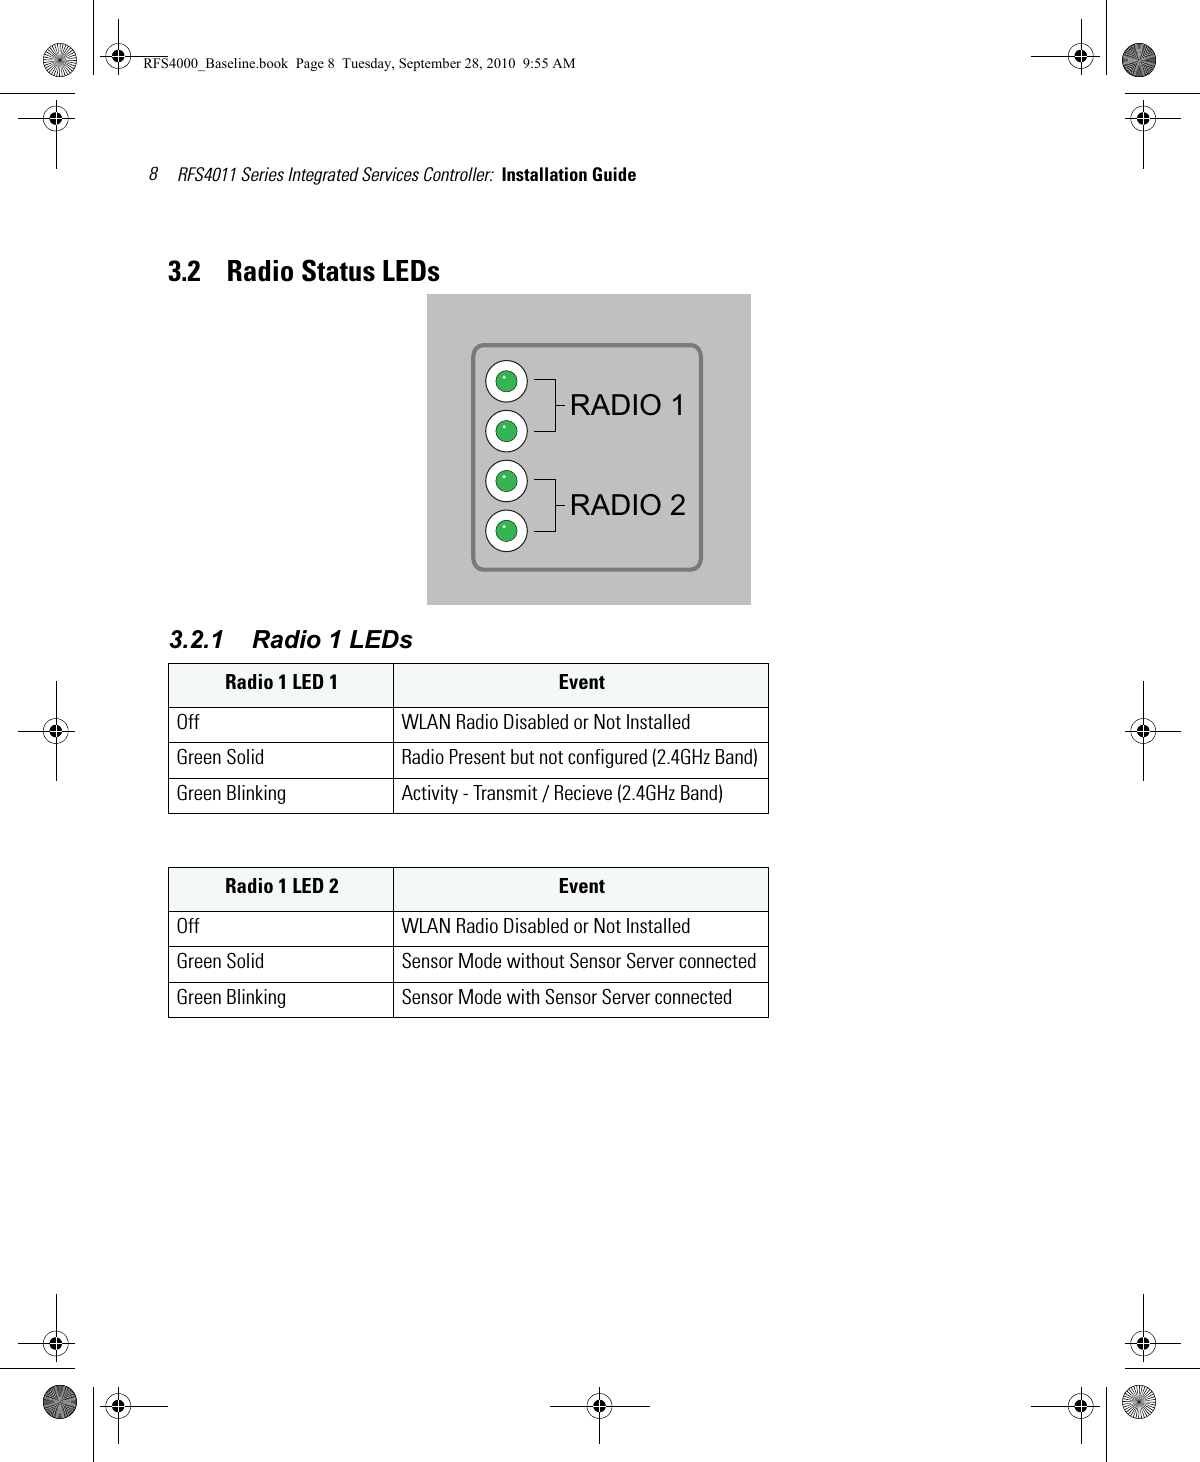 RFS4011 Series Integrated Services Controller:  Installation Guide 83.2    Radio Status LEDs3.2.1    Radio 1 LEDsRadio 1 LED 1 EventOff WLAN Radio Disabled or Not InstalledGreen Solid Radio Present but not configured (2.4GHz Band)Green Blinking Activity - Transmit / Recieve (2.4GHz Band)Radio 1 LED 2 EventOff WLAN Radio Disabled or Not InstalledGreen Solid Sensor Mode without Sensor Server connectedGreen Blinking Sensor Mode with Sensor Server connectedRADIO 1RADIO 2RFS4000_Baseline.book  Page 8  Tuesday, September 28, 2010  9:55 AM